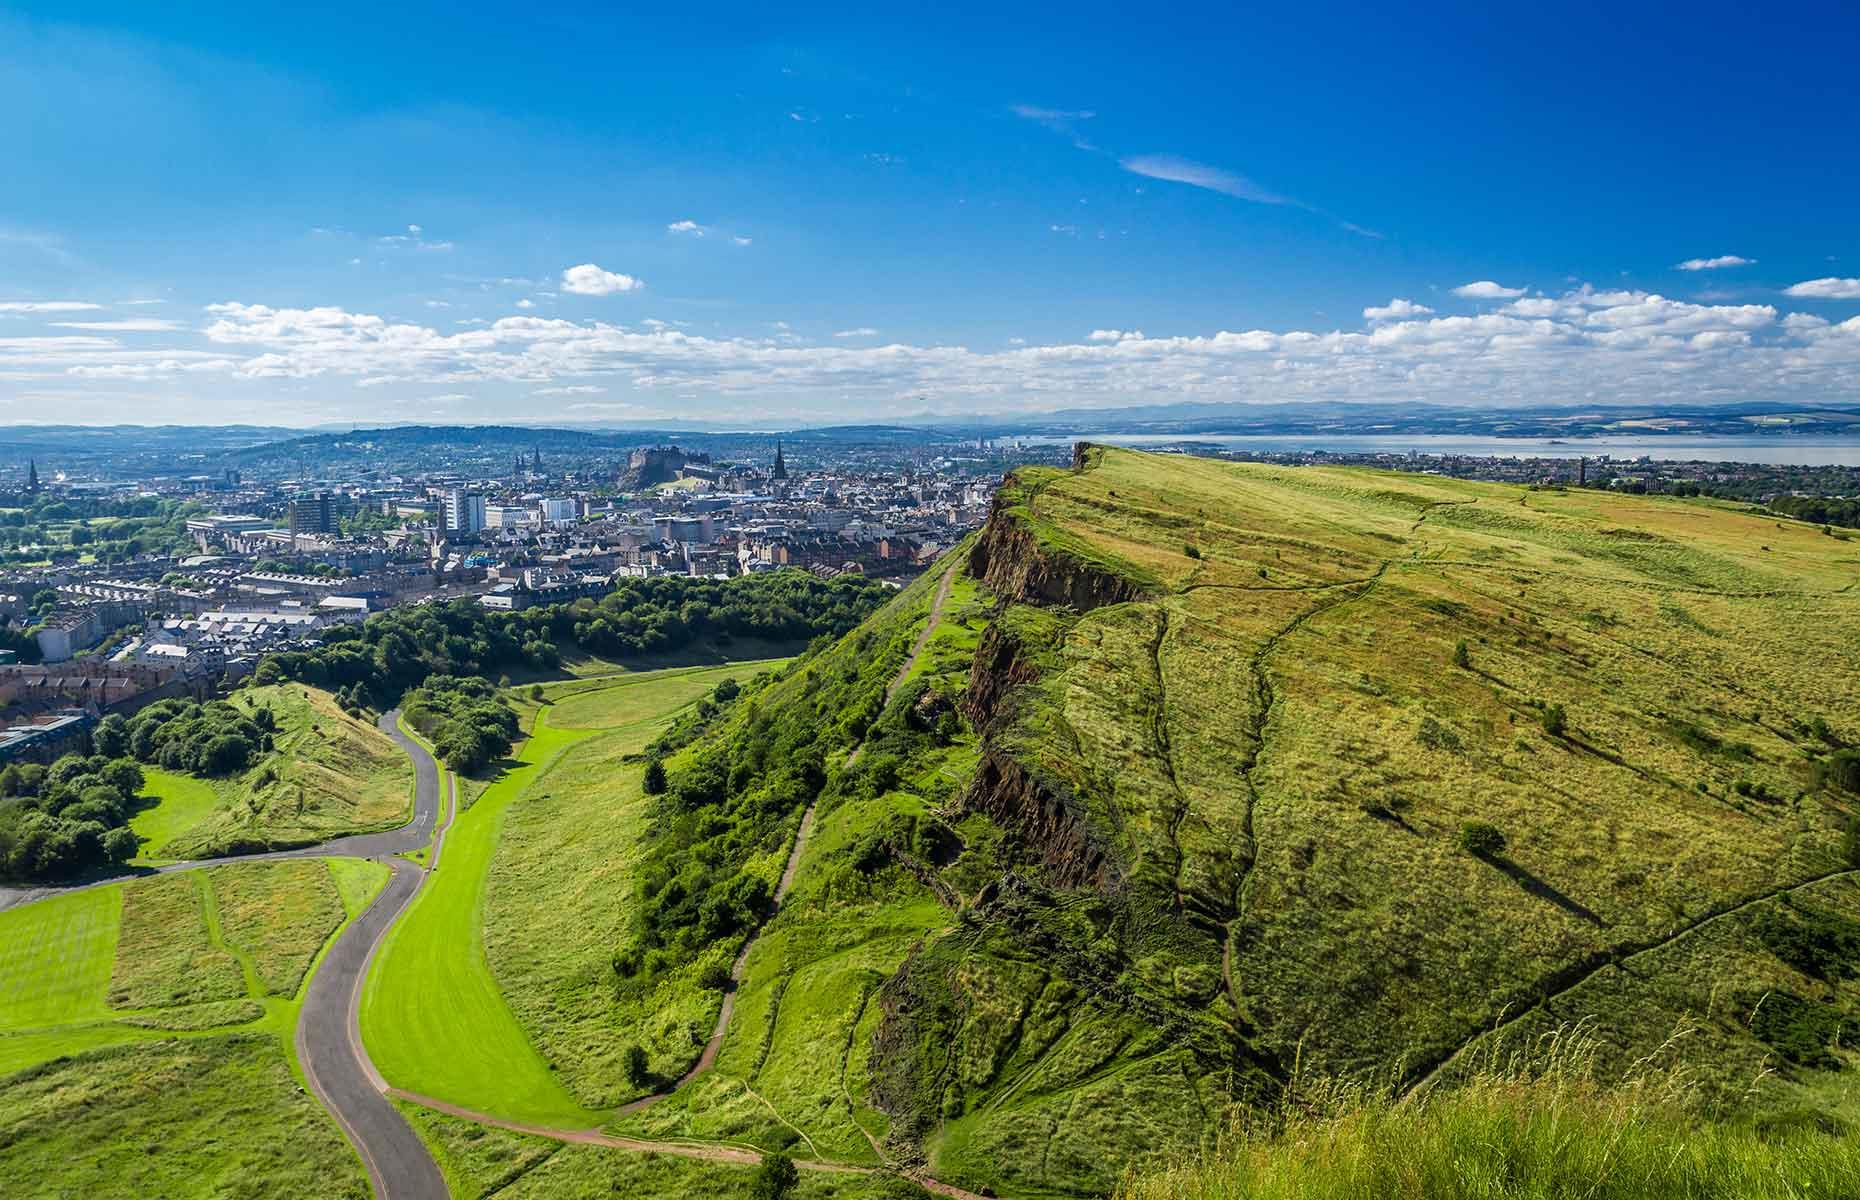 <p>Saunter from landmark to landmark on this 3.10-mile (5km) route that covers 6,430 steps in just over an hour. Take in the city views from Arthur’s Seat, an ancient volcano, before heading back to ground level and past the 16th-century Palace of Holyroodhouse, the Queen’s official residence in the city. Enjoy a stroll along the Royal Mile with a pit stop at the National Museum around the corner or continue onto the crowning landmark of the city, <a href="https://www.edinburghcastle.scot/">Edinburgh Castle</a>. If time permits, pay a visit to the Gothic-style Scott Monument or the wonderful National Gallery nearby.</p>